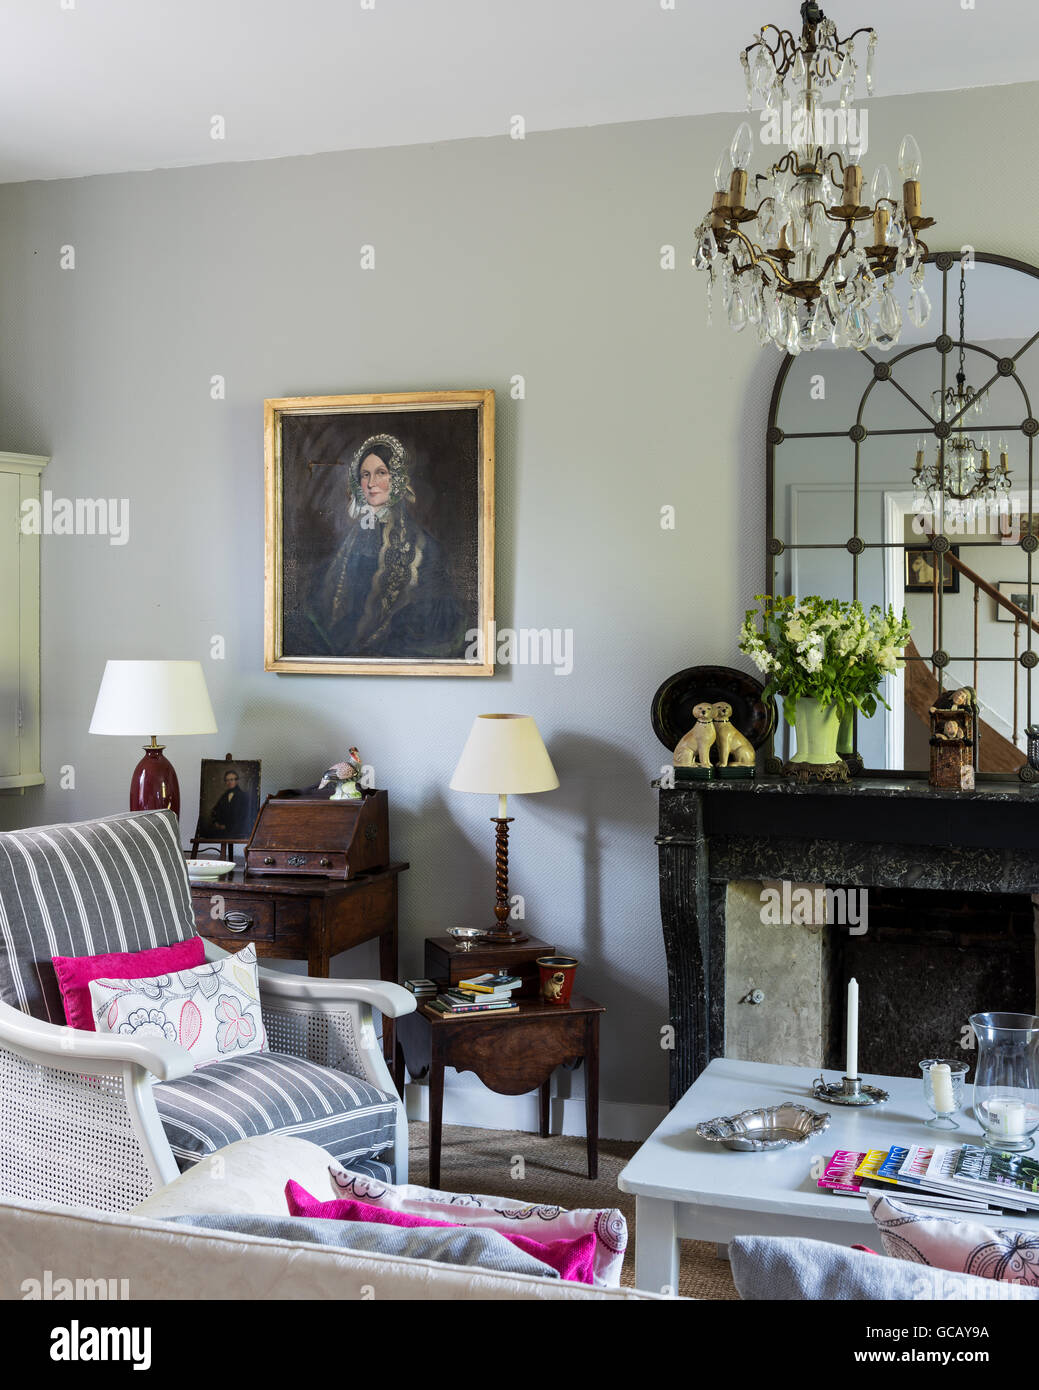 Light grey sitting room with crystal chandelier, oil painted portrait and striped upholstered armchairs Stock Photo